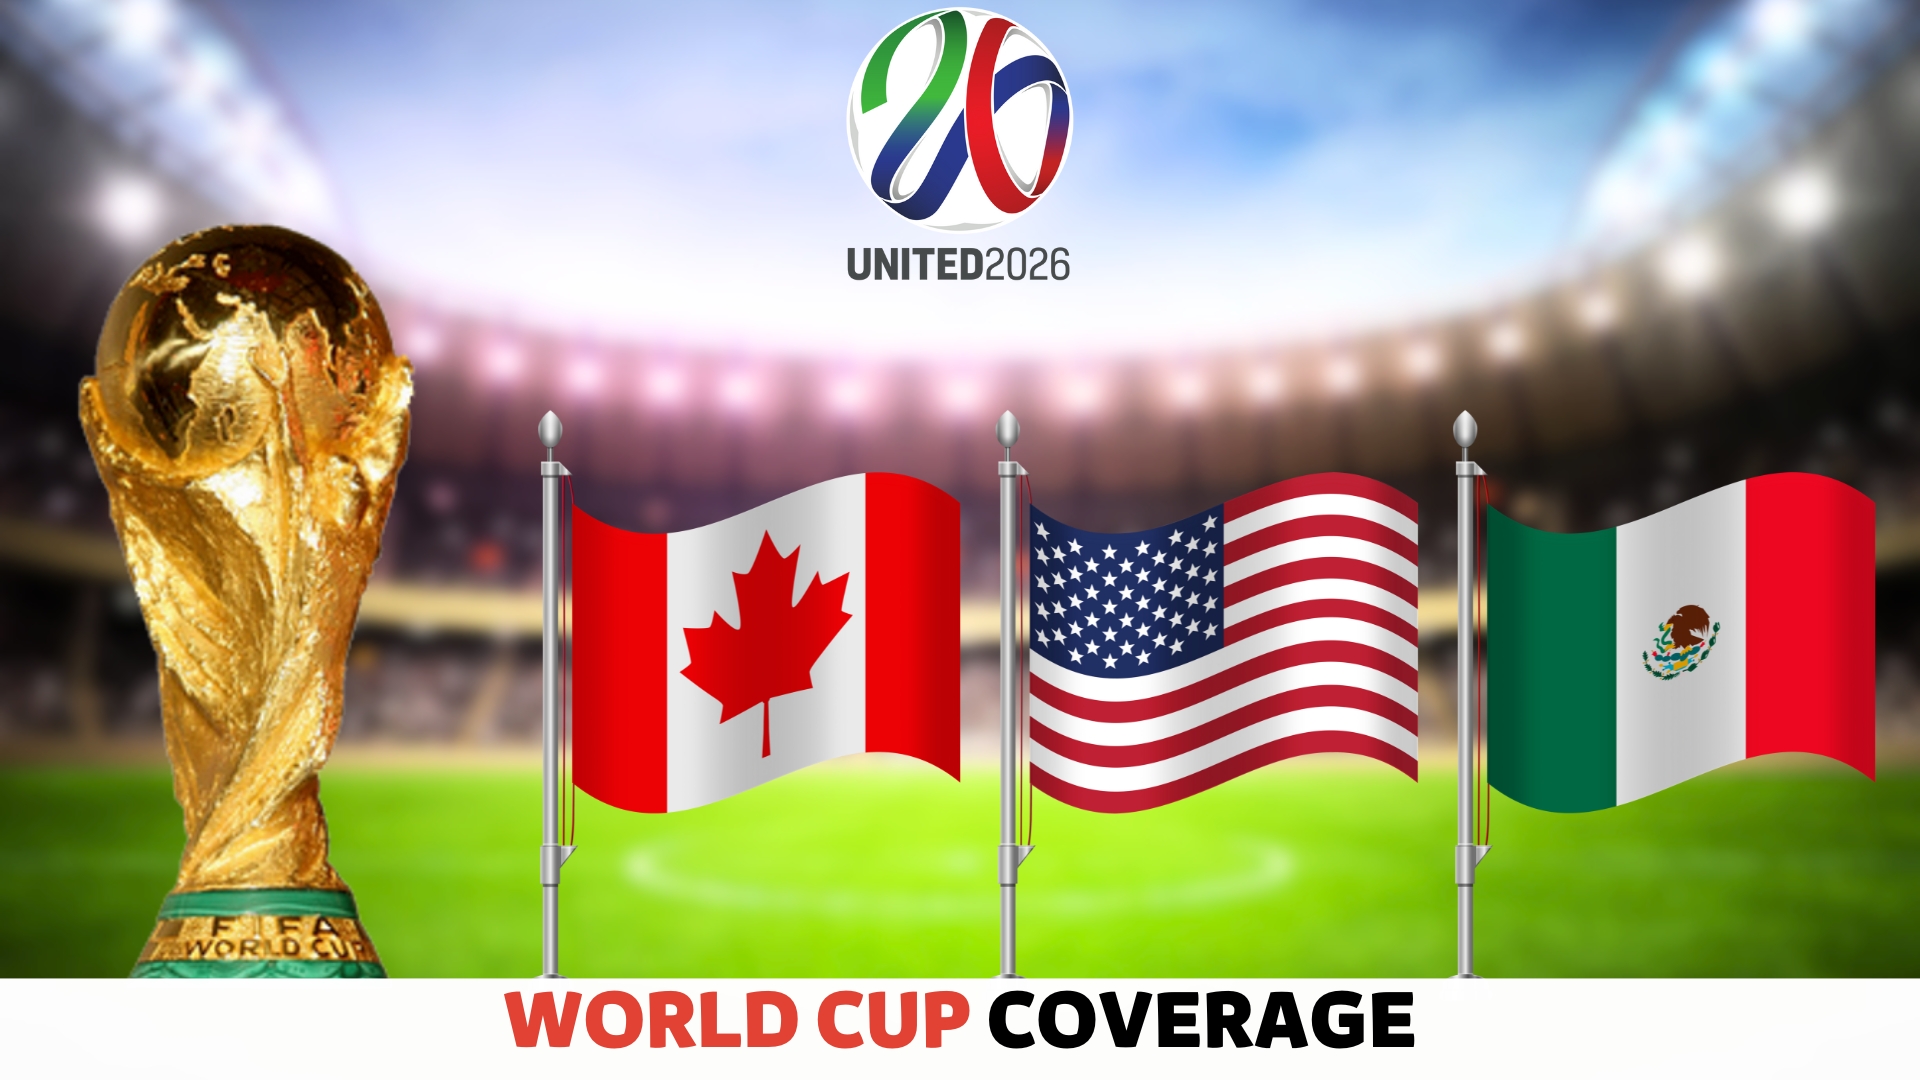 United 2026 FIFA World Cup